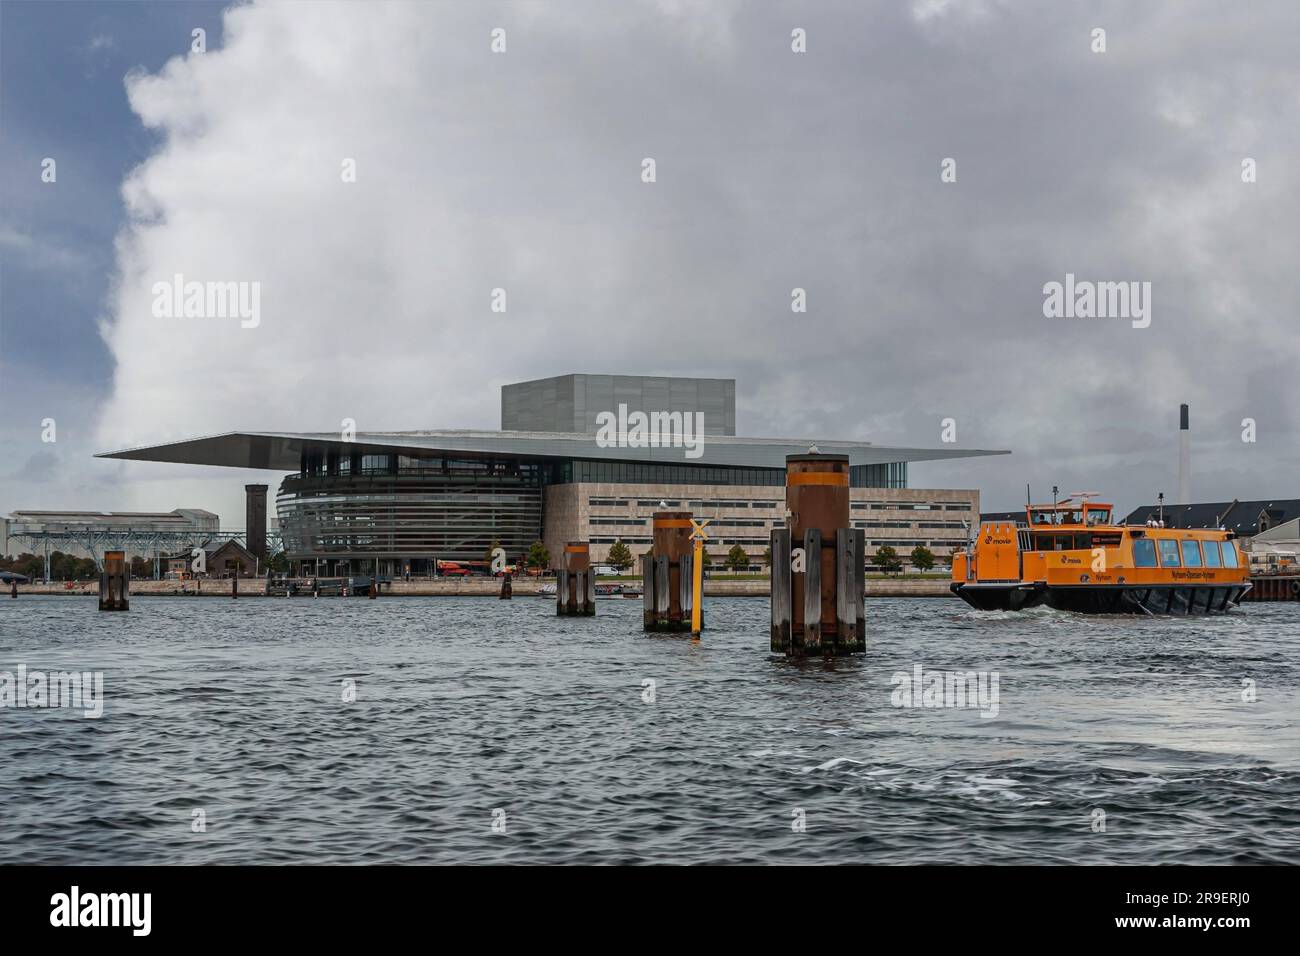 Copenhagen, Denmark - September 14, 2010: Orange Nyhavn-Opera ferry on gray water with South and west facades of Opera building under gray cloudscape Stock Photo